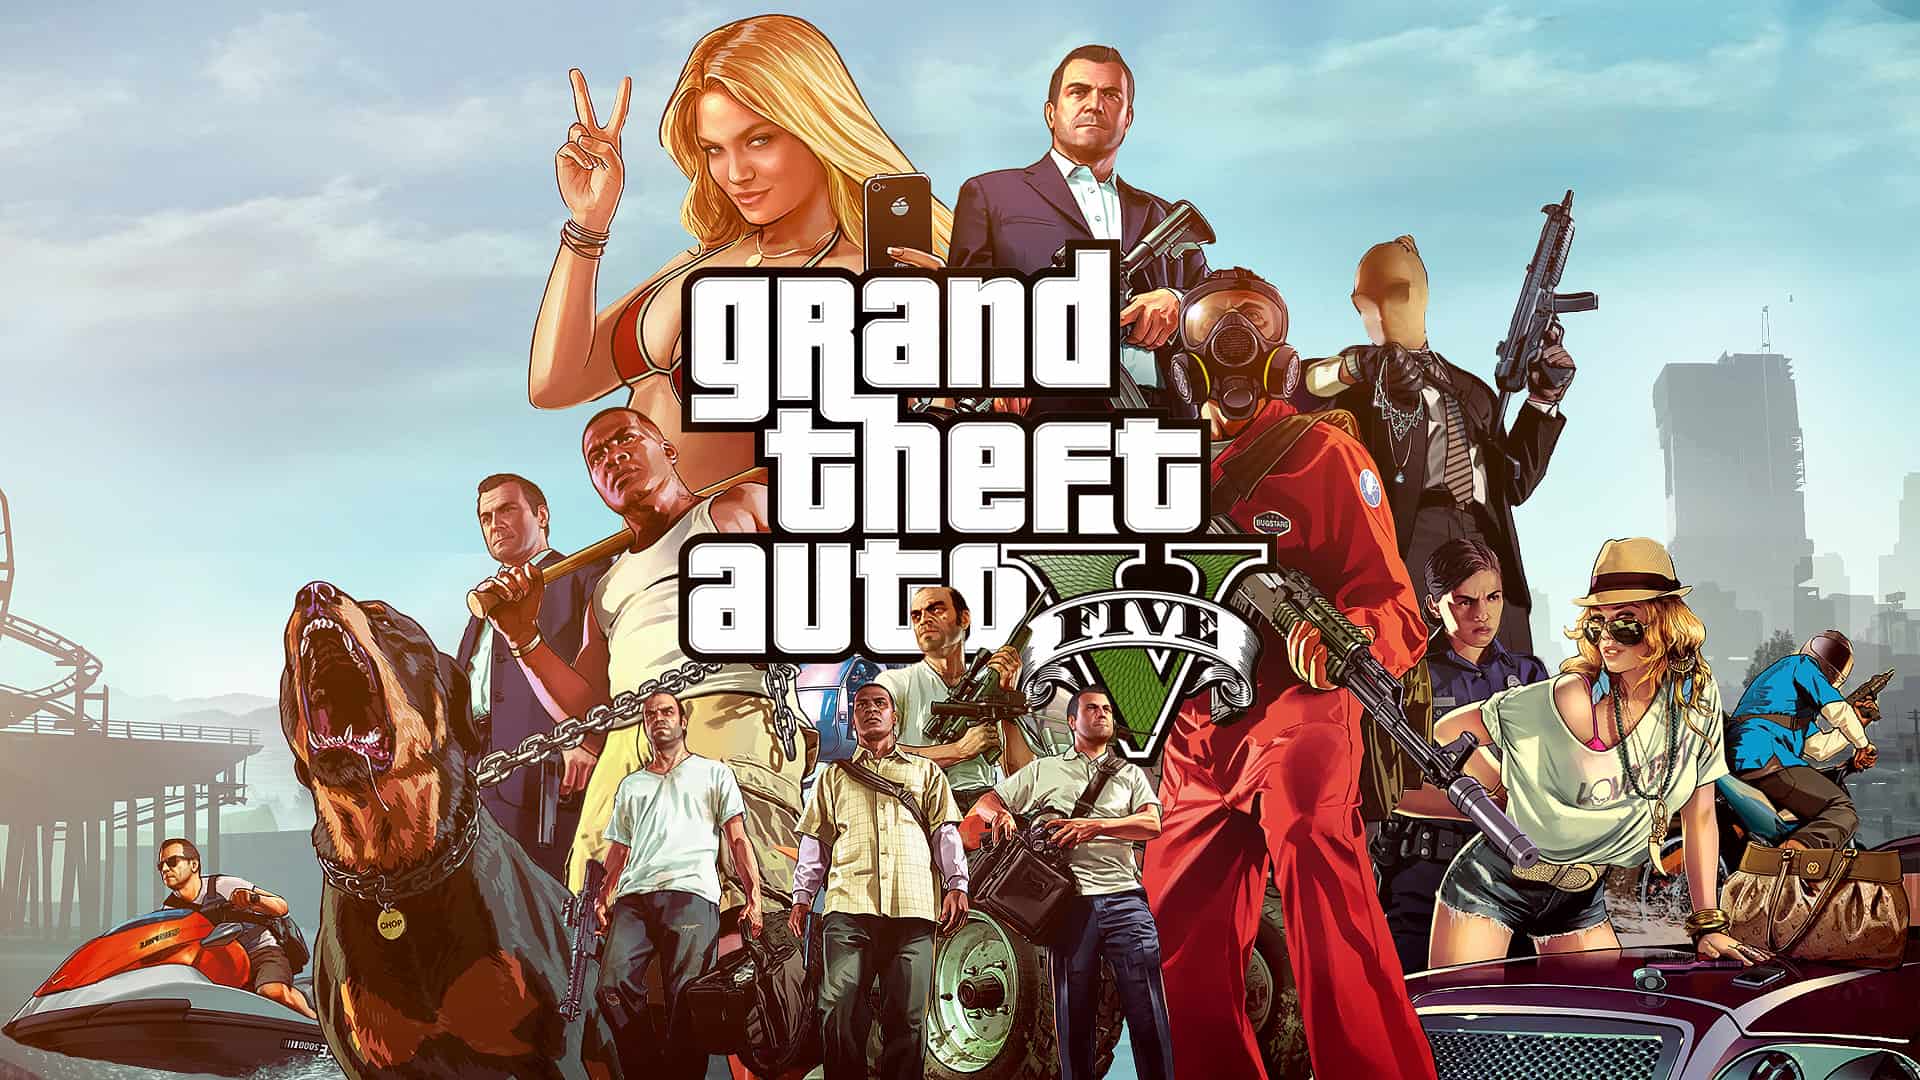 Grand Theft Auto V System requirements - Can I run Grand Theft Auto V